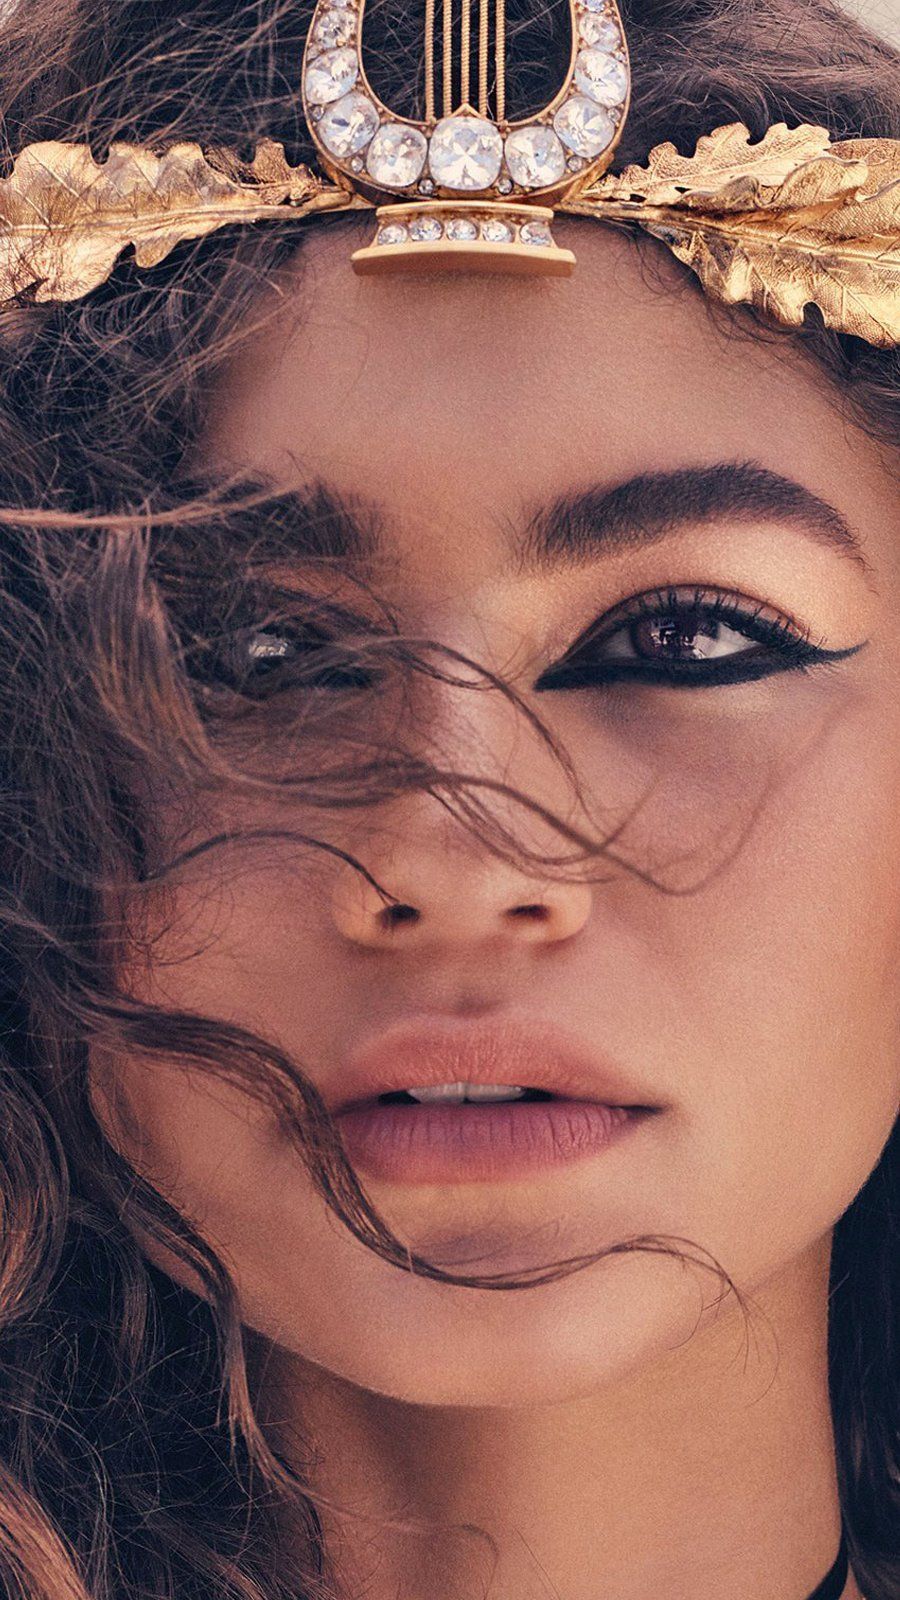 Zendaya is the new face of the Tom Ford beauty campaign. - Zendaya